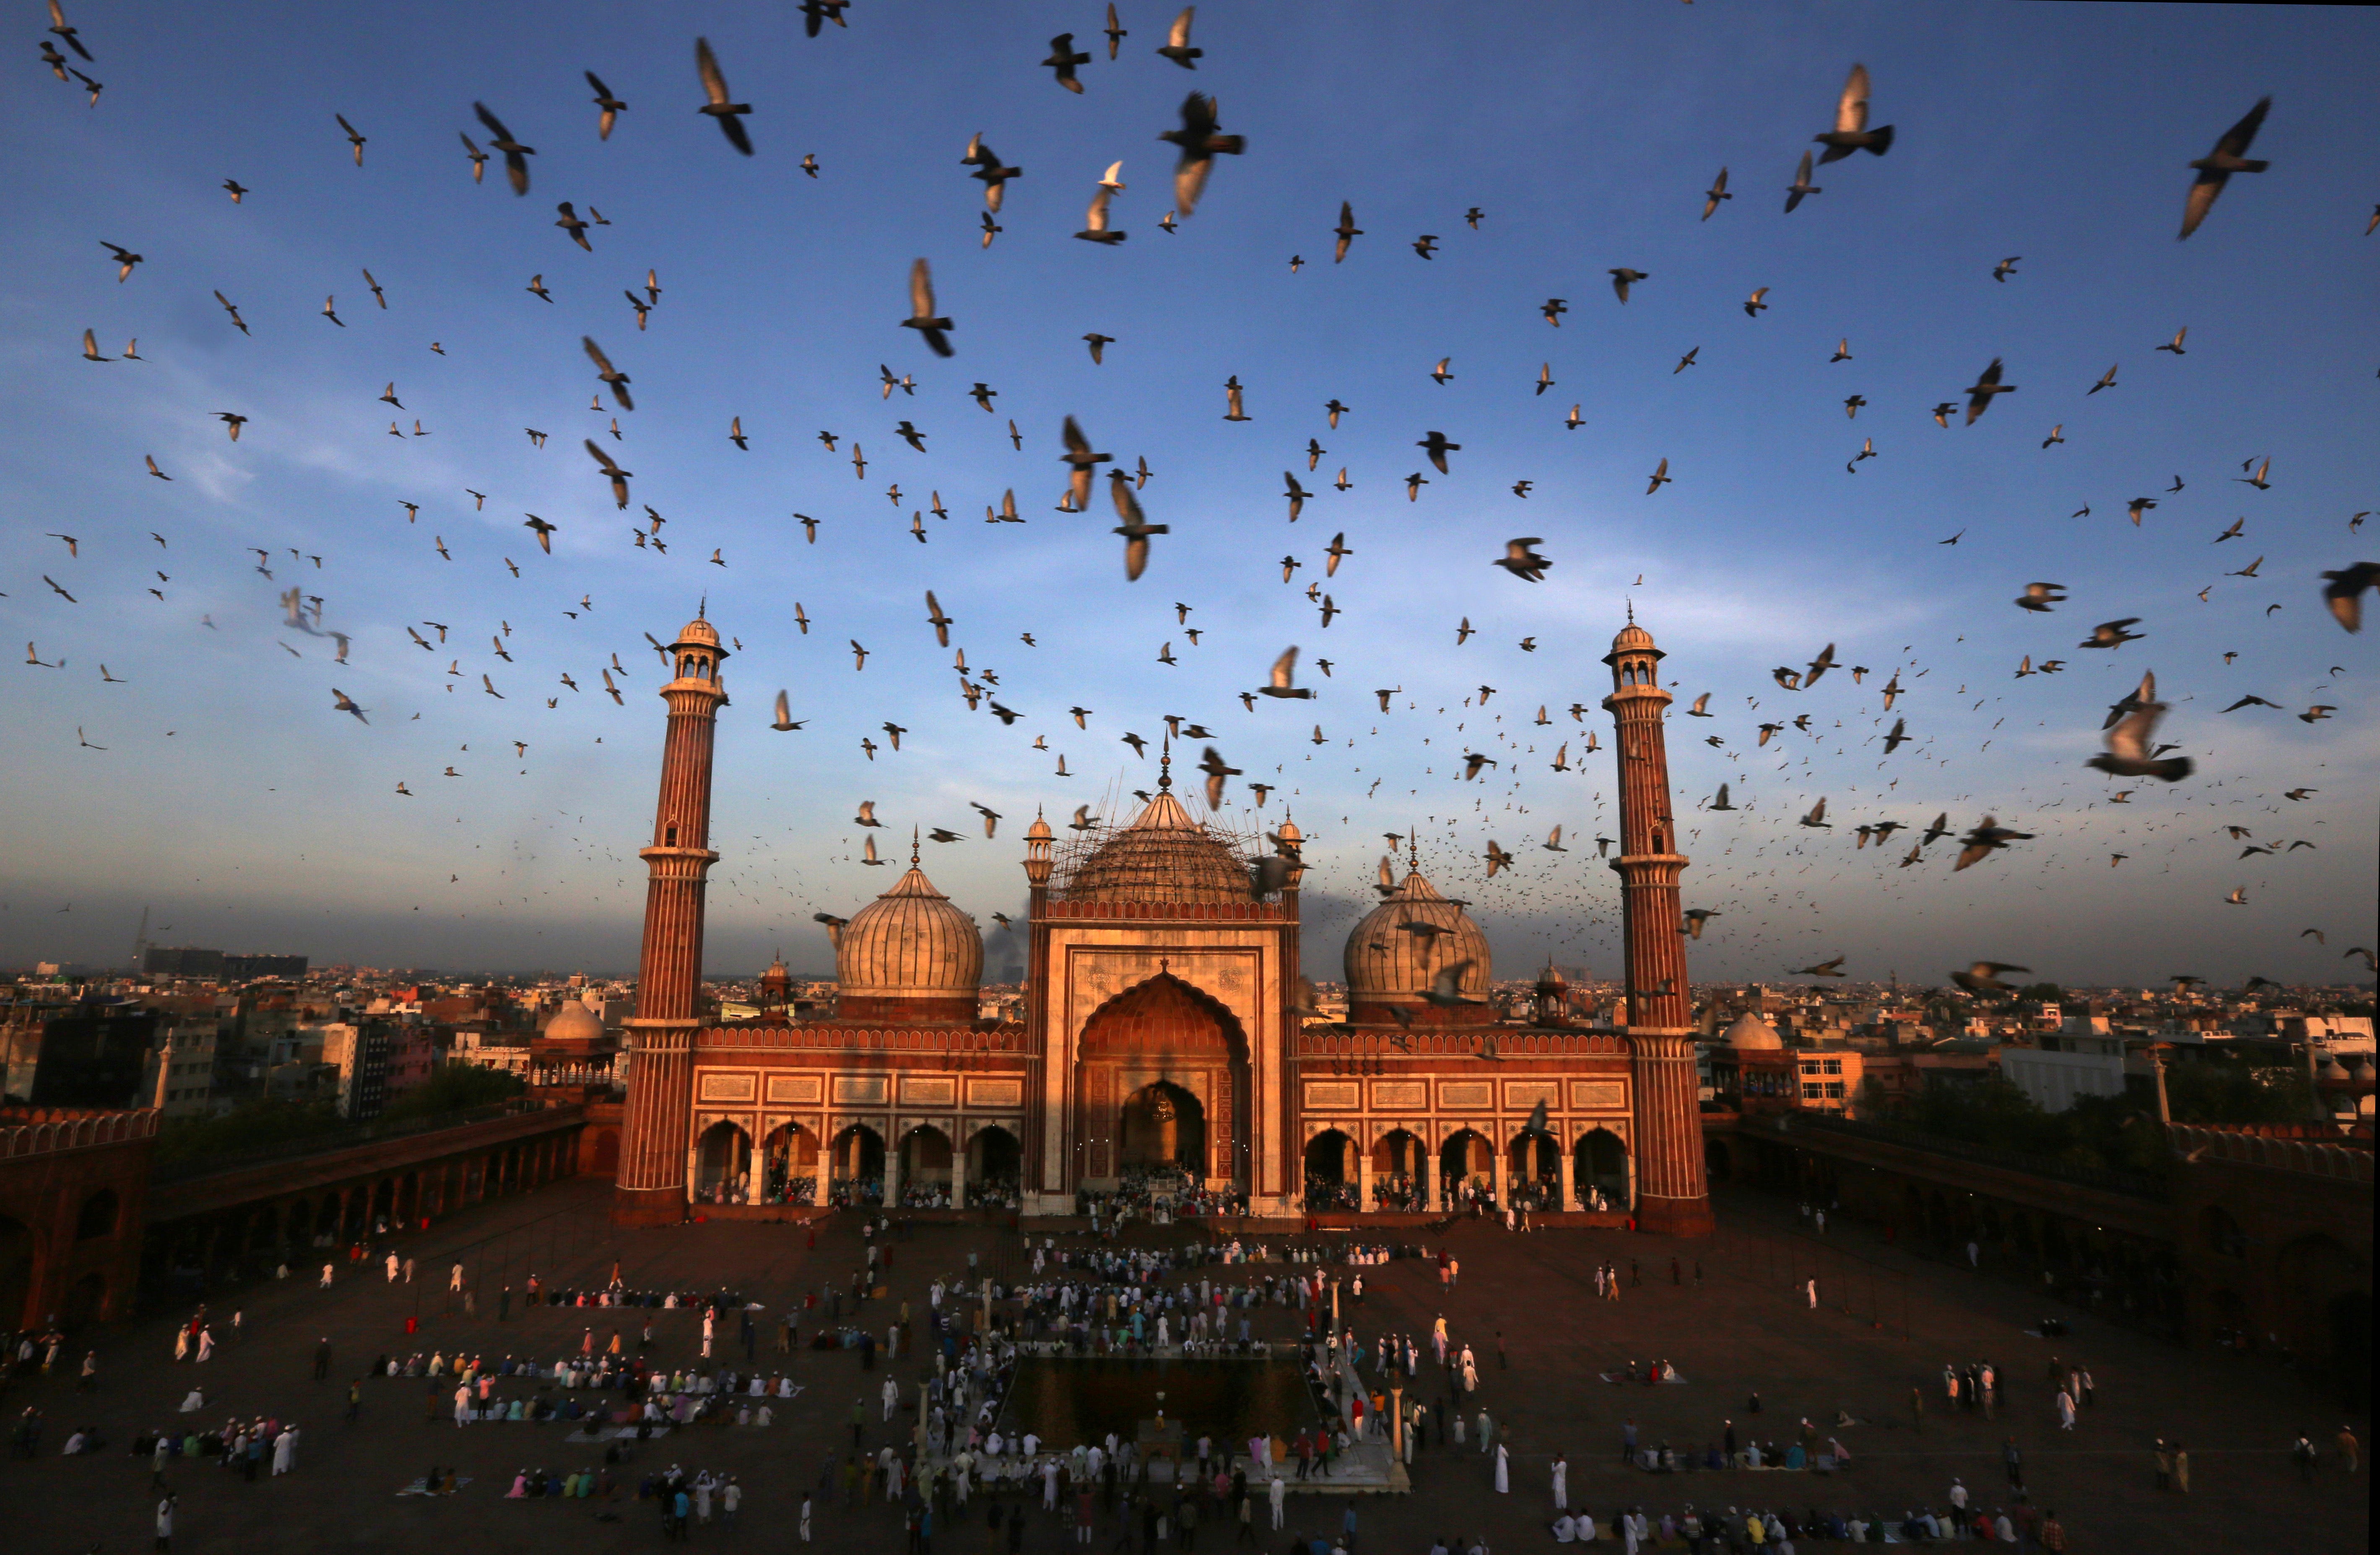 Pigeons fly past as Muslims gather to offer Eid al-Adha prayers at Jama Masjid in New Delhi, India, Aug. 22, 2018. Muslims around the world celebrate Eid al-Adha, or the Feast of the Sacrifice, by sacrificing animals to commemorate the prophet Ibrahi